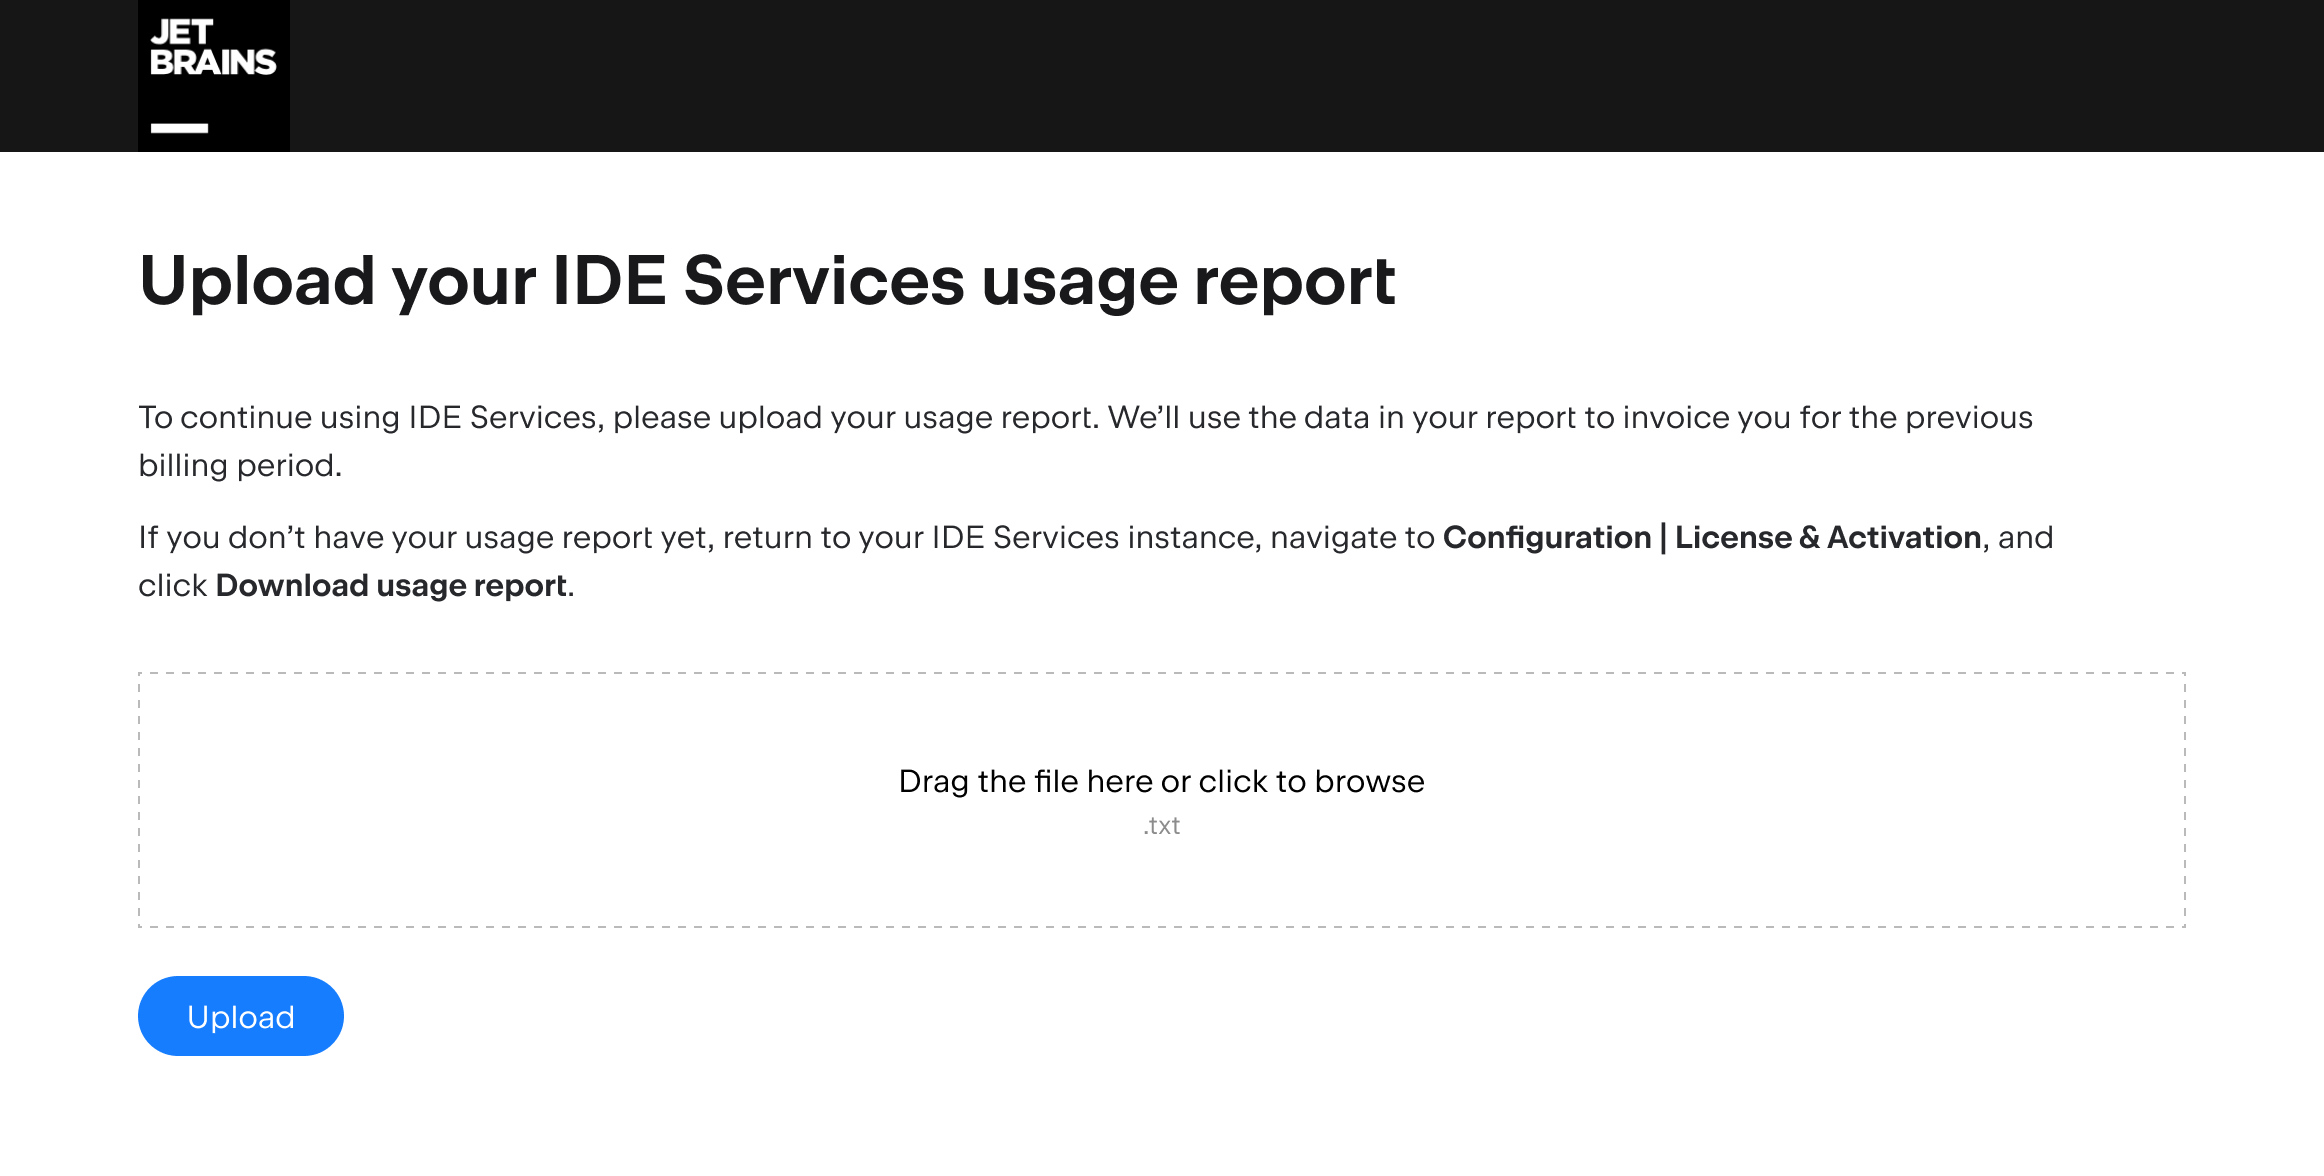 Upload your license usage report